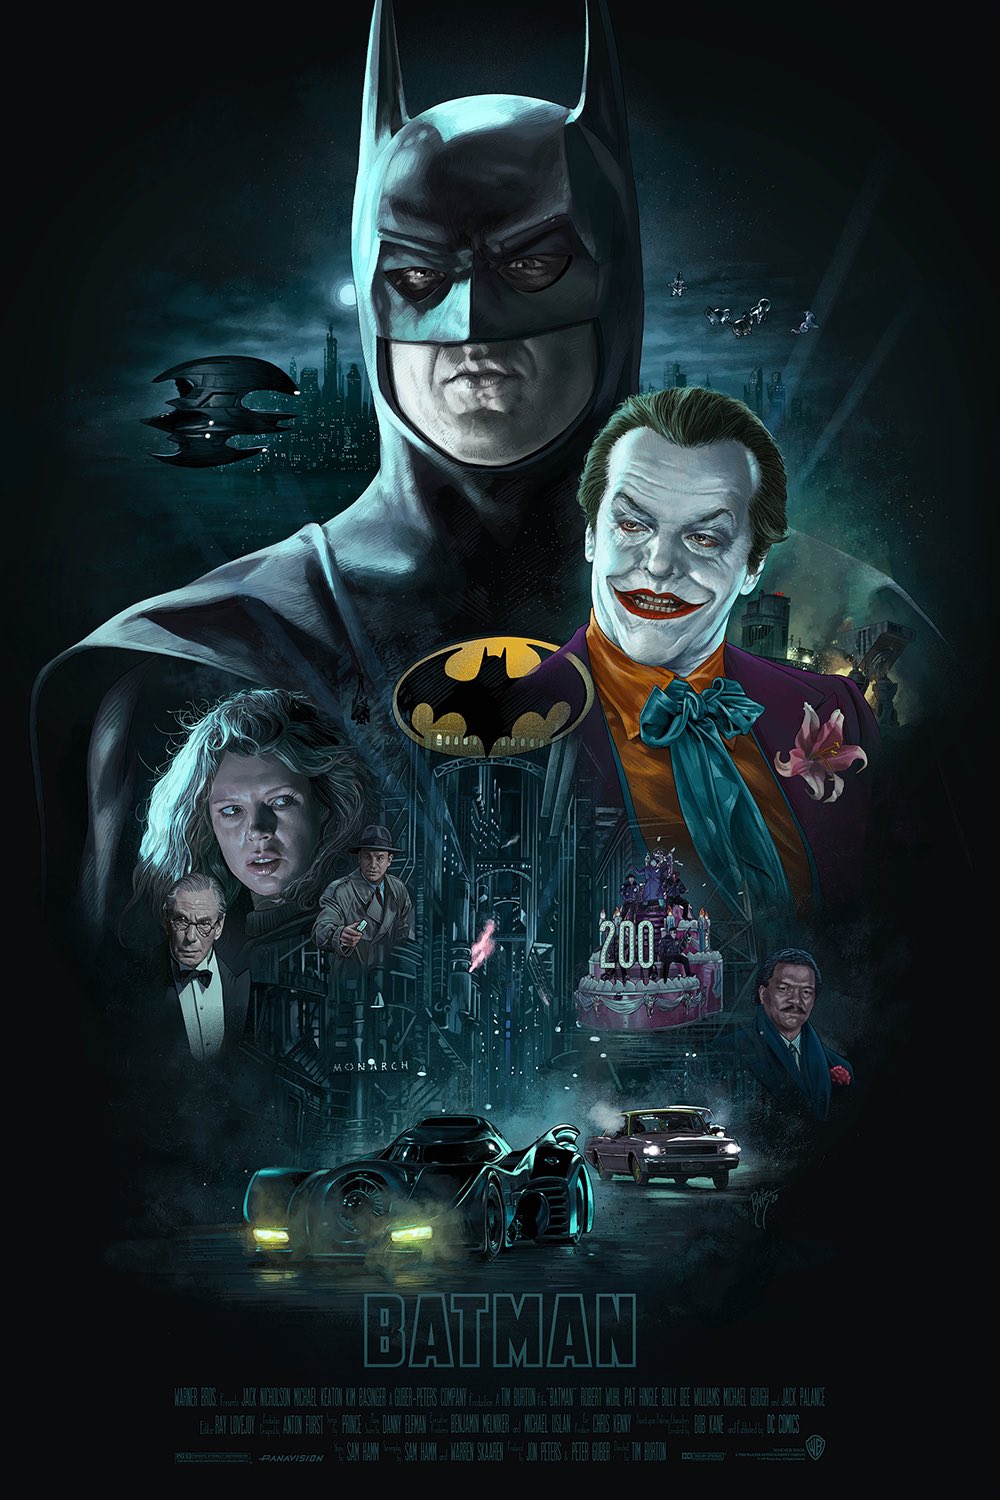 udbrud jern utilfredsstillende Heroes Reforged on Twitter: "For anyone who didn't know, Tim Burton  directed two Batman movies — 'BATMAN' in 1989 and 'BATMAN RETURNS' in 1992.  Both are now streaming on HBOMax! https://t.co/pTXzIW8T3r" /